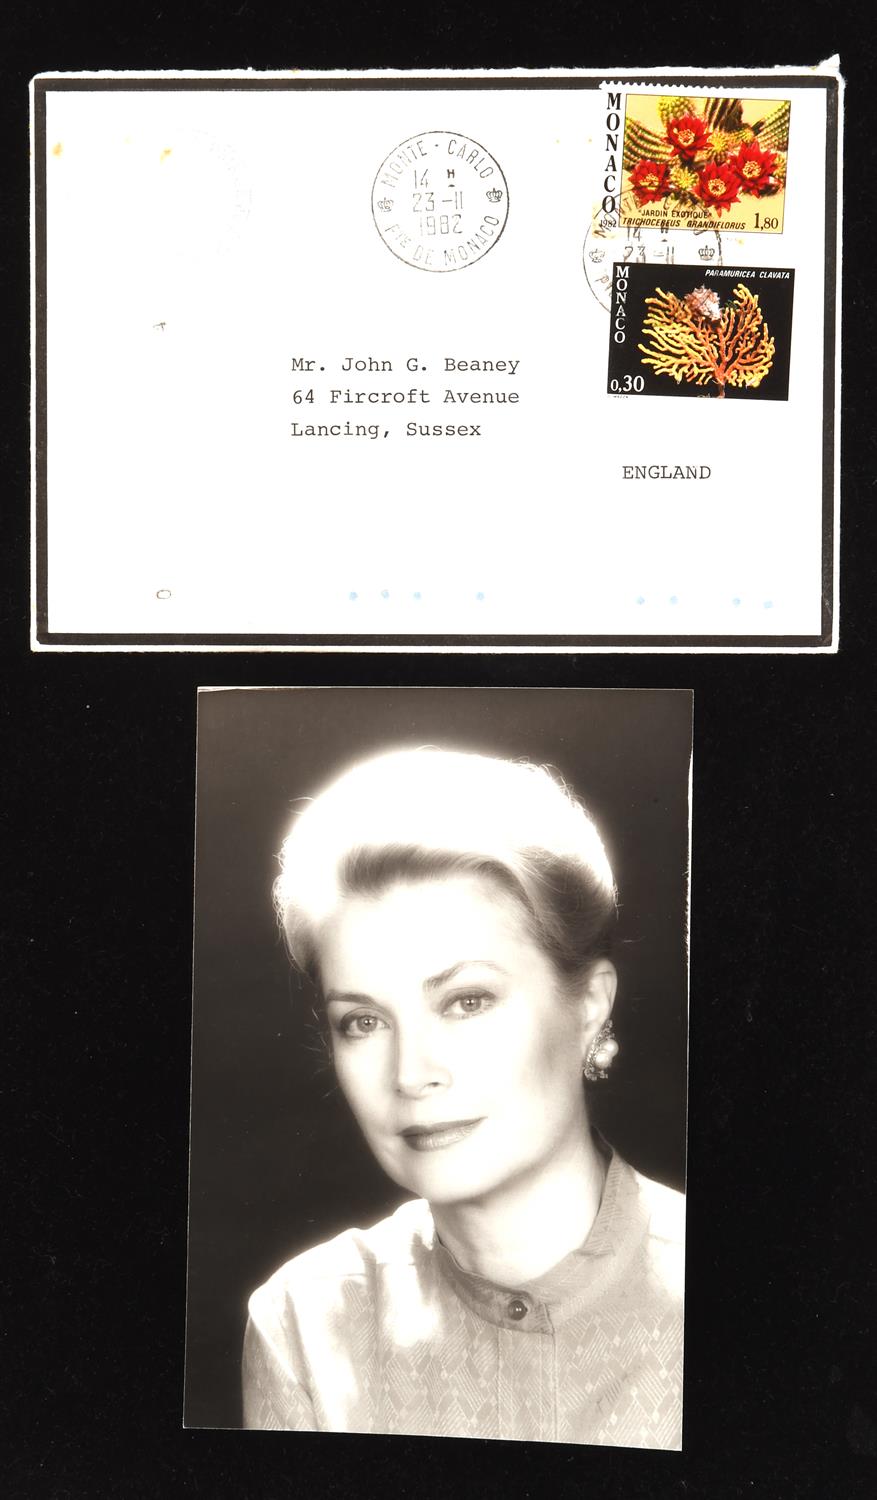 Grace Kelly (1920-1982). 6 x 4 inch black and white photograph, enclosed within the original